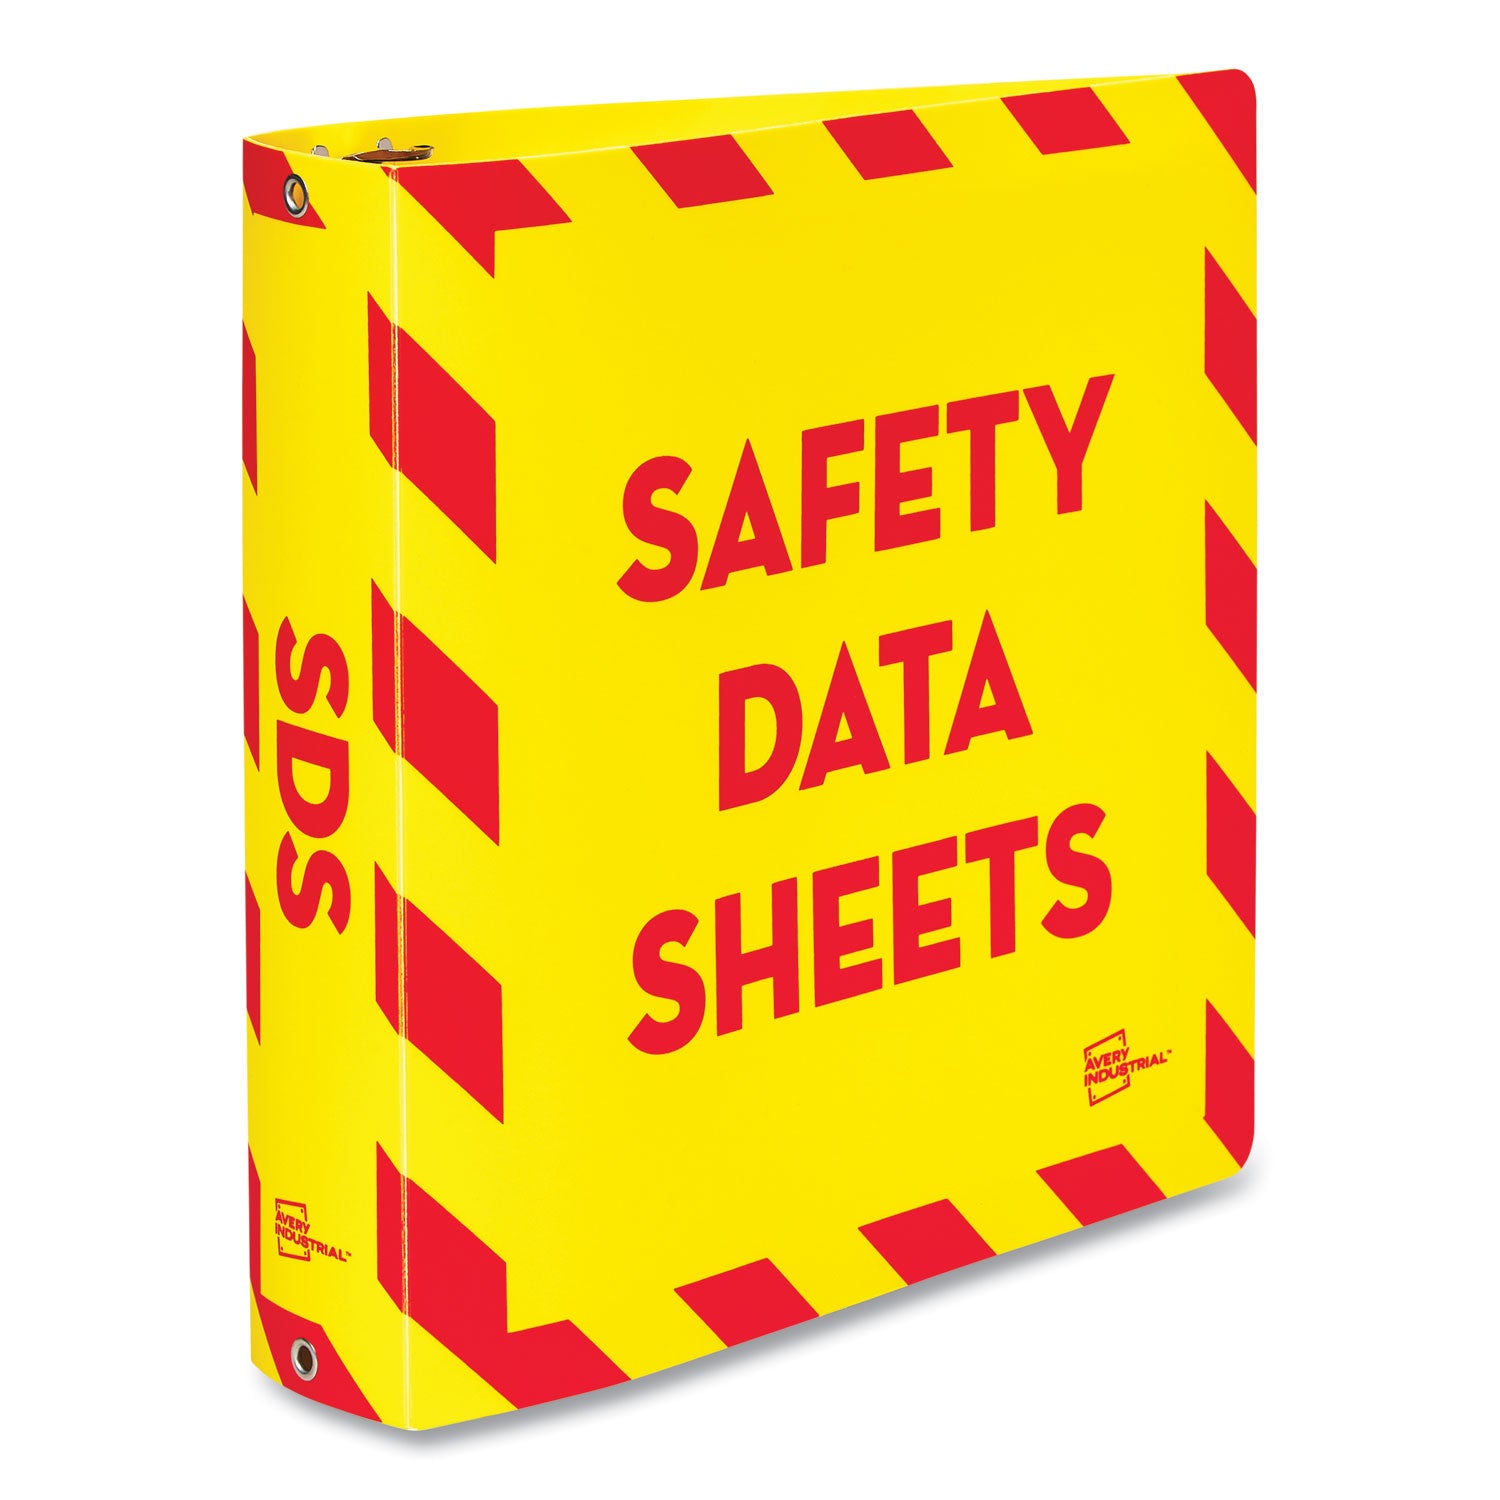 ultraduty-safety-data-sheet-binders-with-chain-3-rings-2-capacity-11-x-85-yellow-red_ave77712 - 1